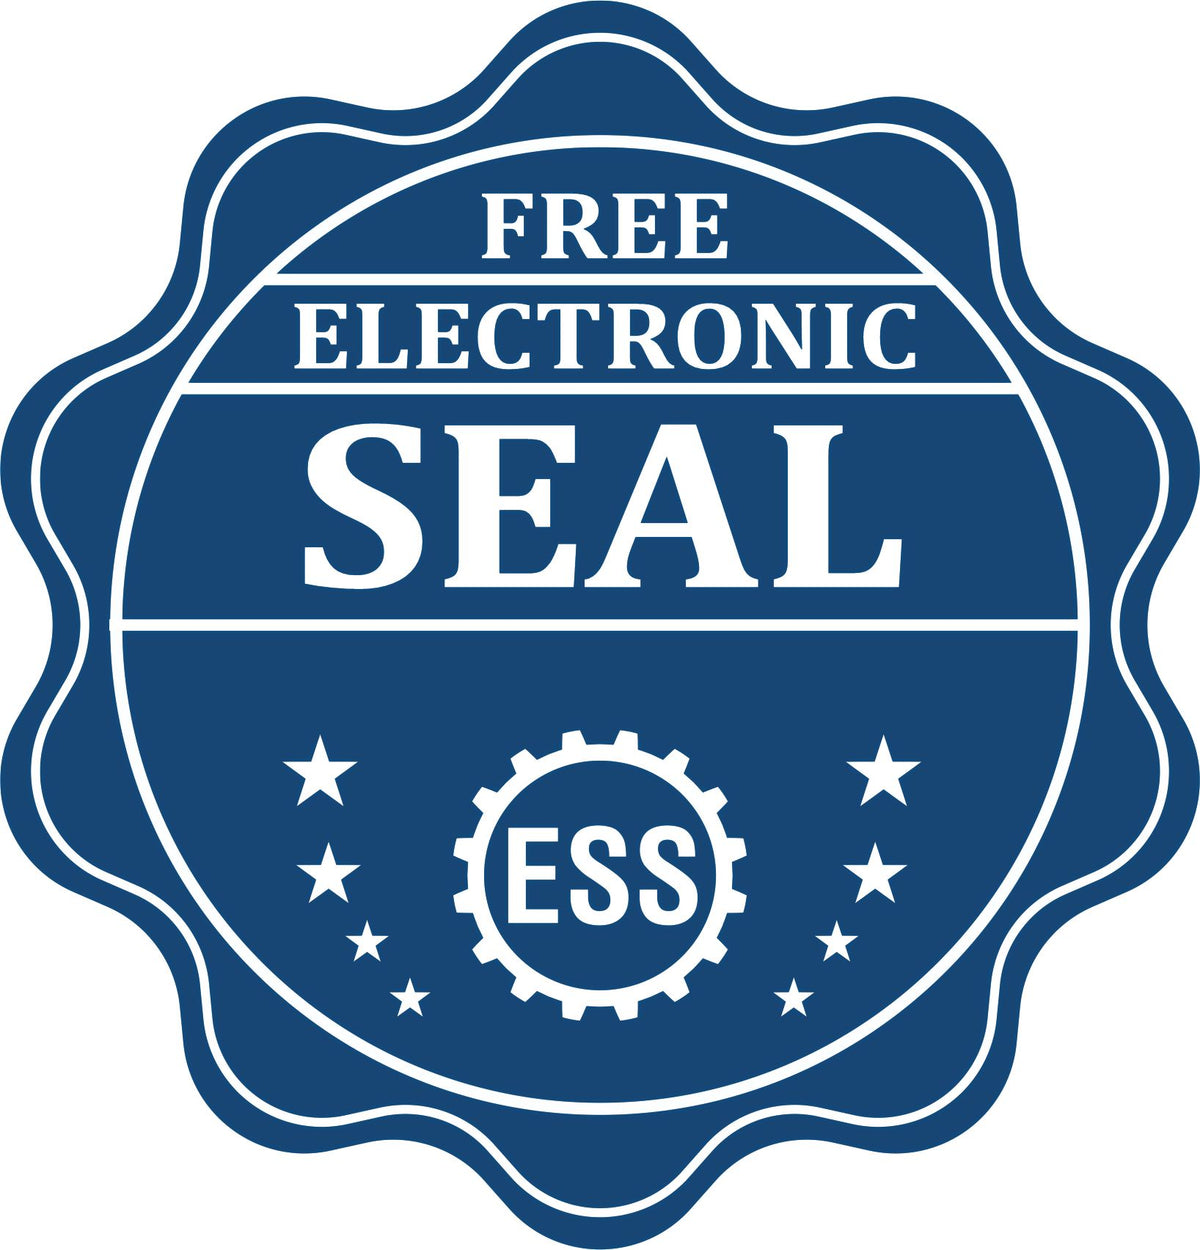 A badge showing a free electronic seal for the Premium MaxLight Pre-Inked Utah Engineering Stamp with stars and the ESS gear on the emblem.